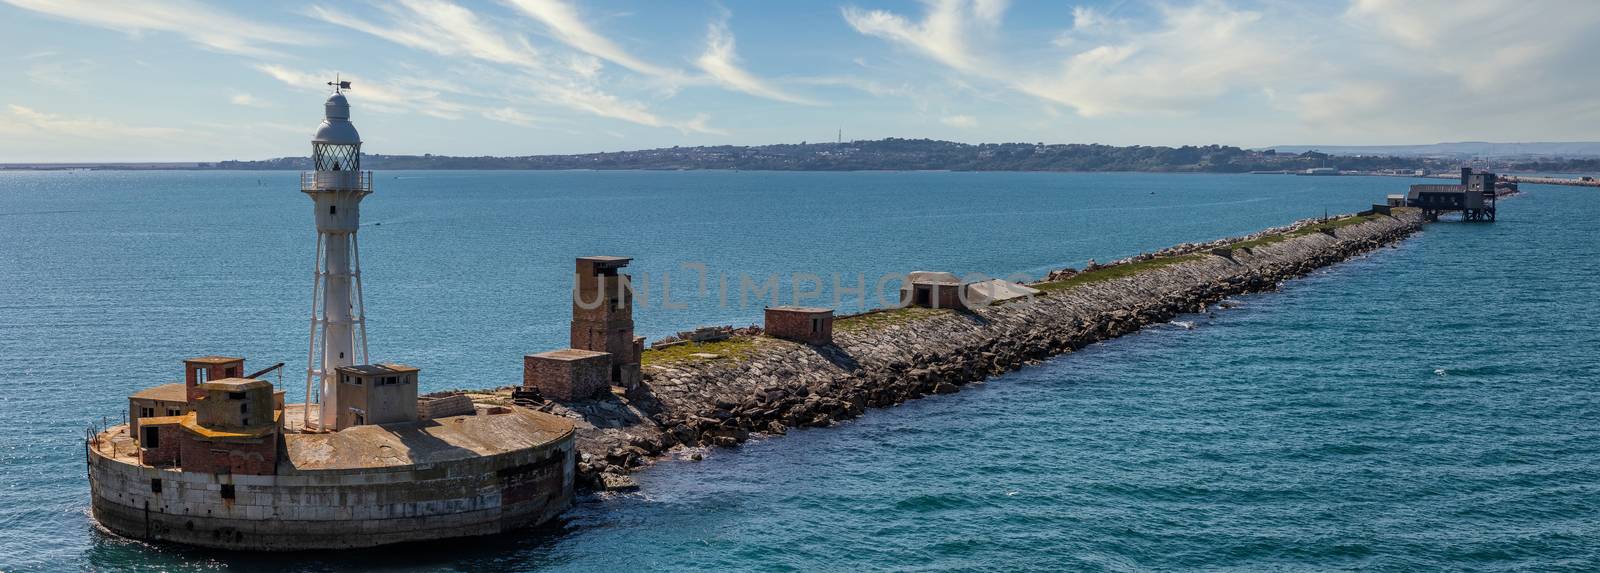 Lighthouse and water barrier at the entrance to the Portland harbour in Weymouth Bay, UK. Gorgeous cloudy blue sky and coast line as a background.